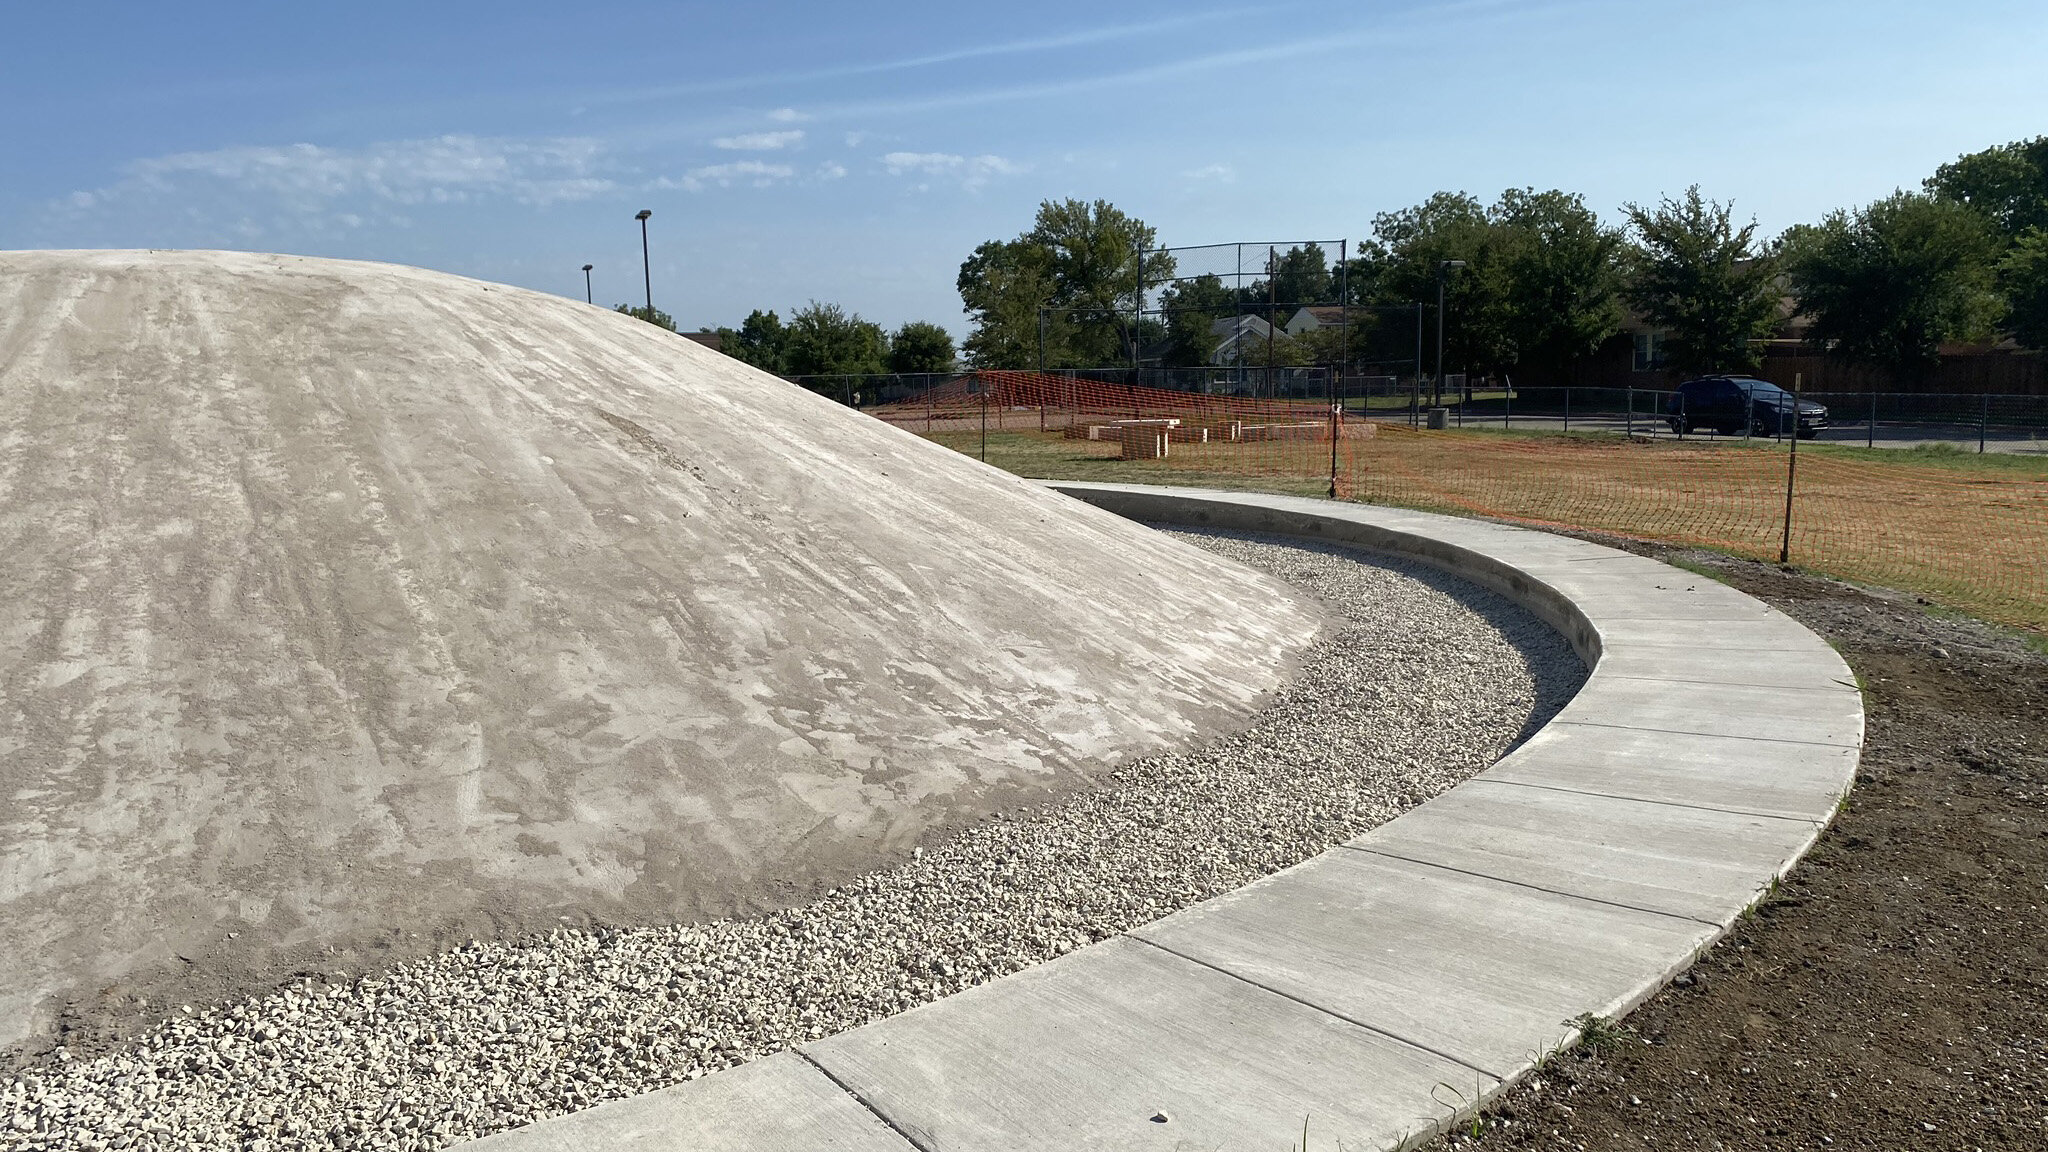  The playground at Arturo Salazar Elementary School also features a large turf mound, here it is under construction awaiting a layer of padding before the turf is installed. 